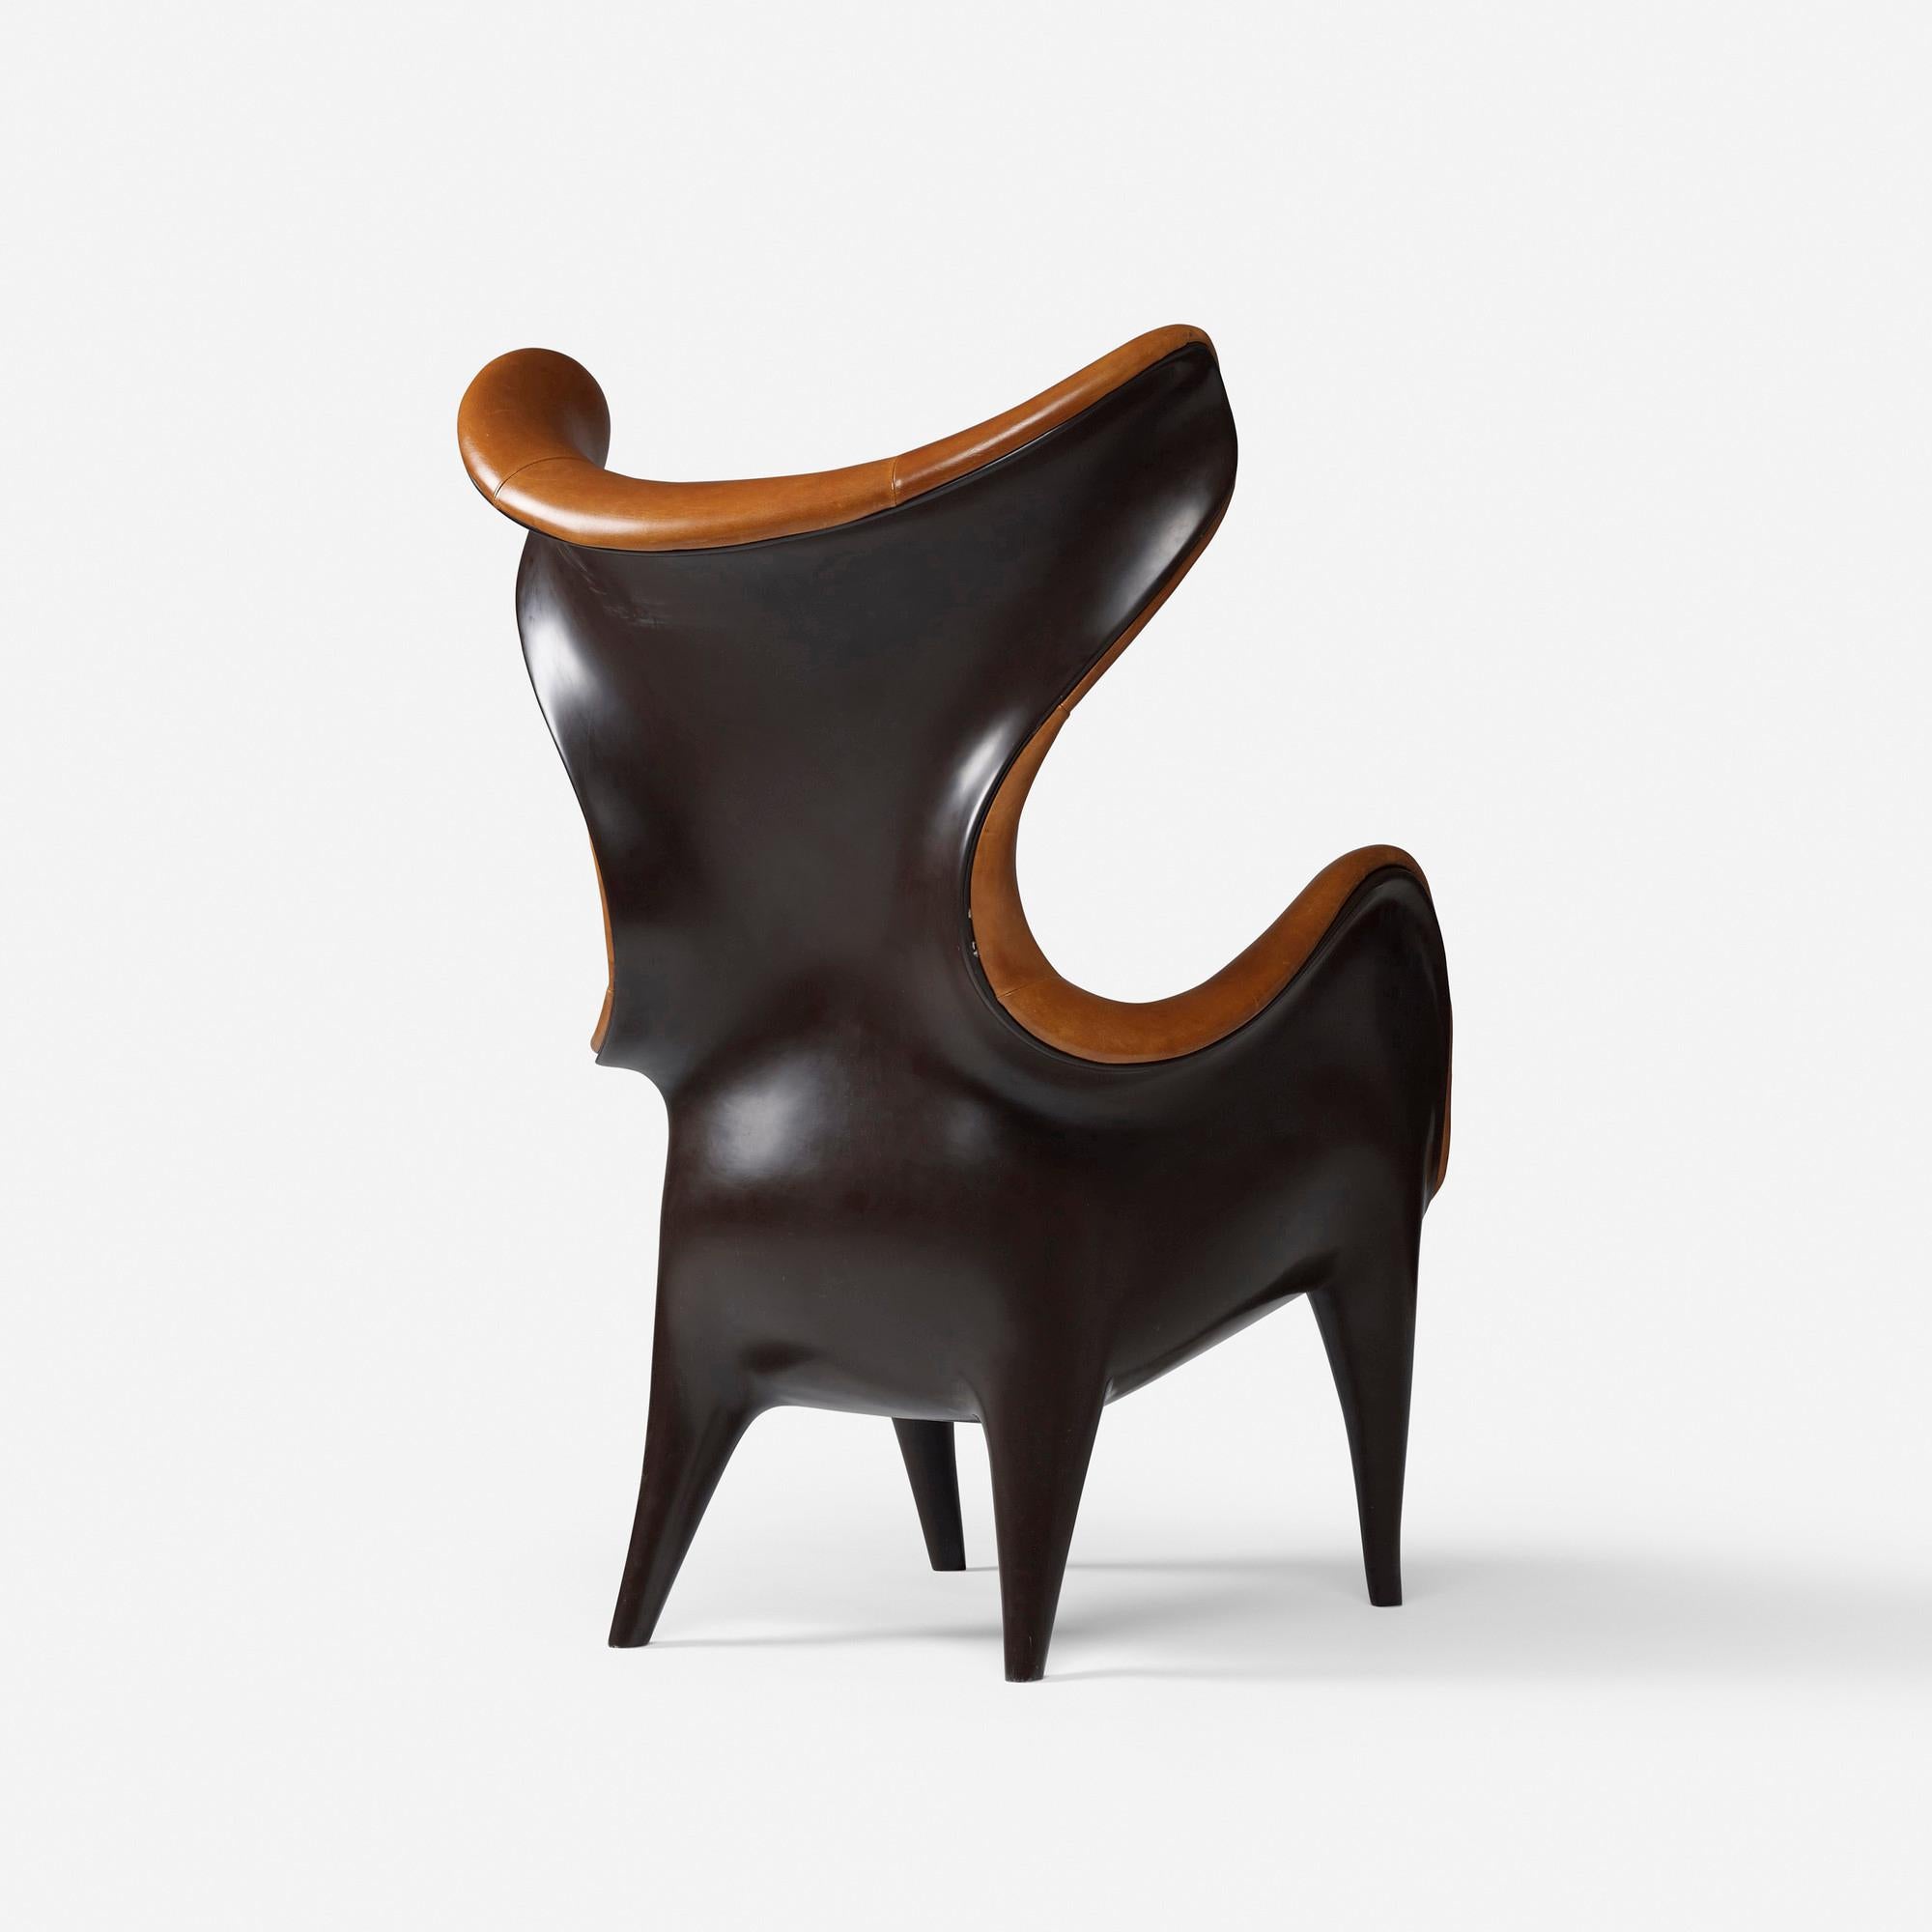 Jordan Mozer (b. 1958), Johnny Wing Back Chair, Leather/Resin, Made in Chicago. The Frankie and Johnny lounge chairs were created for Hotel 57 in New York in 2007. Collection of the artist. Signed. The Frankie chair measurements are  28